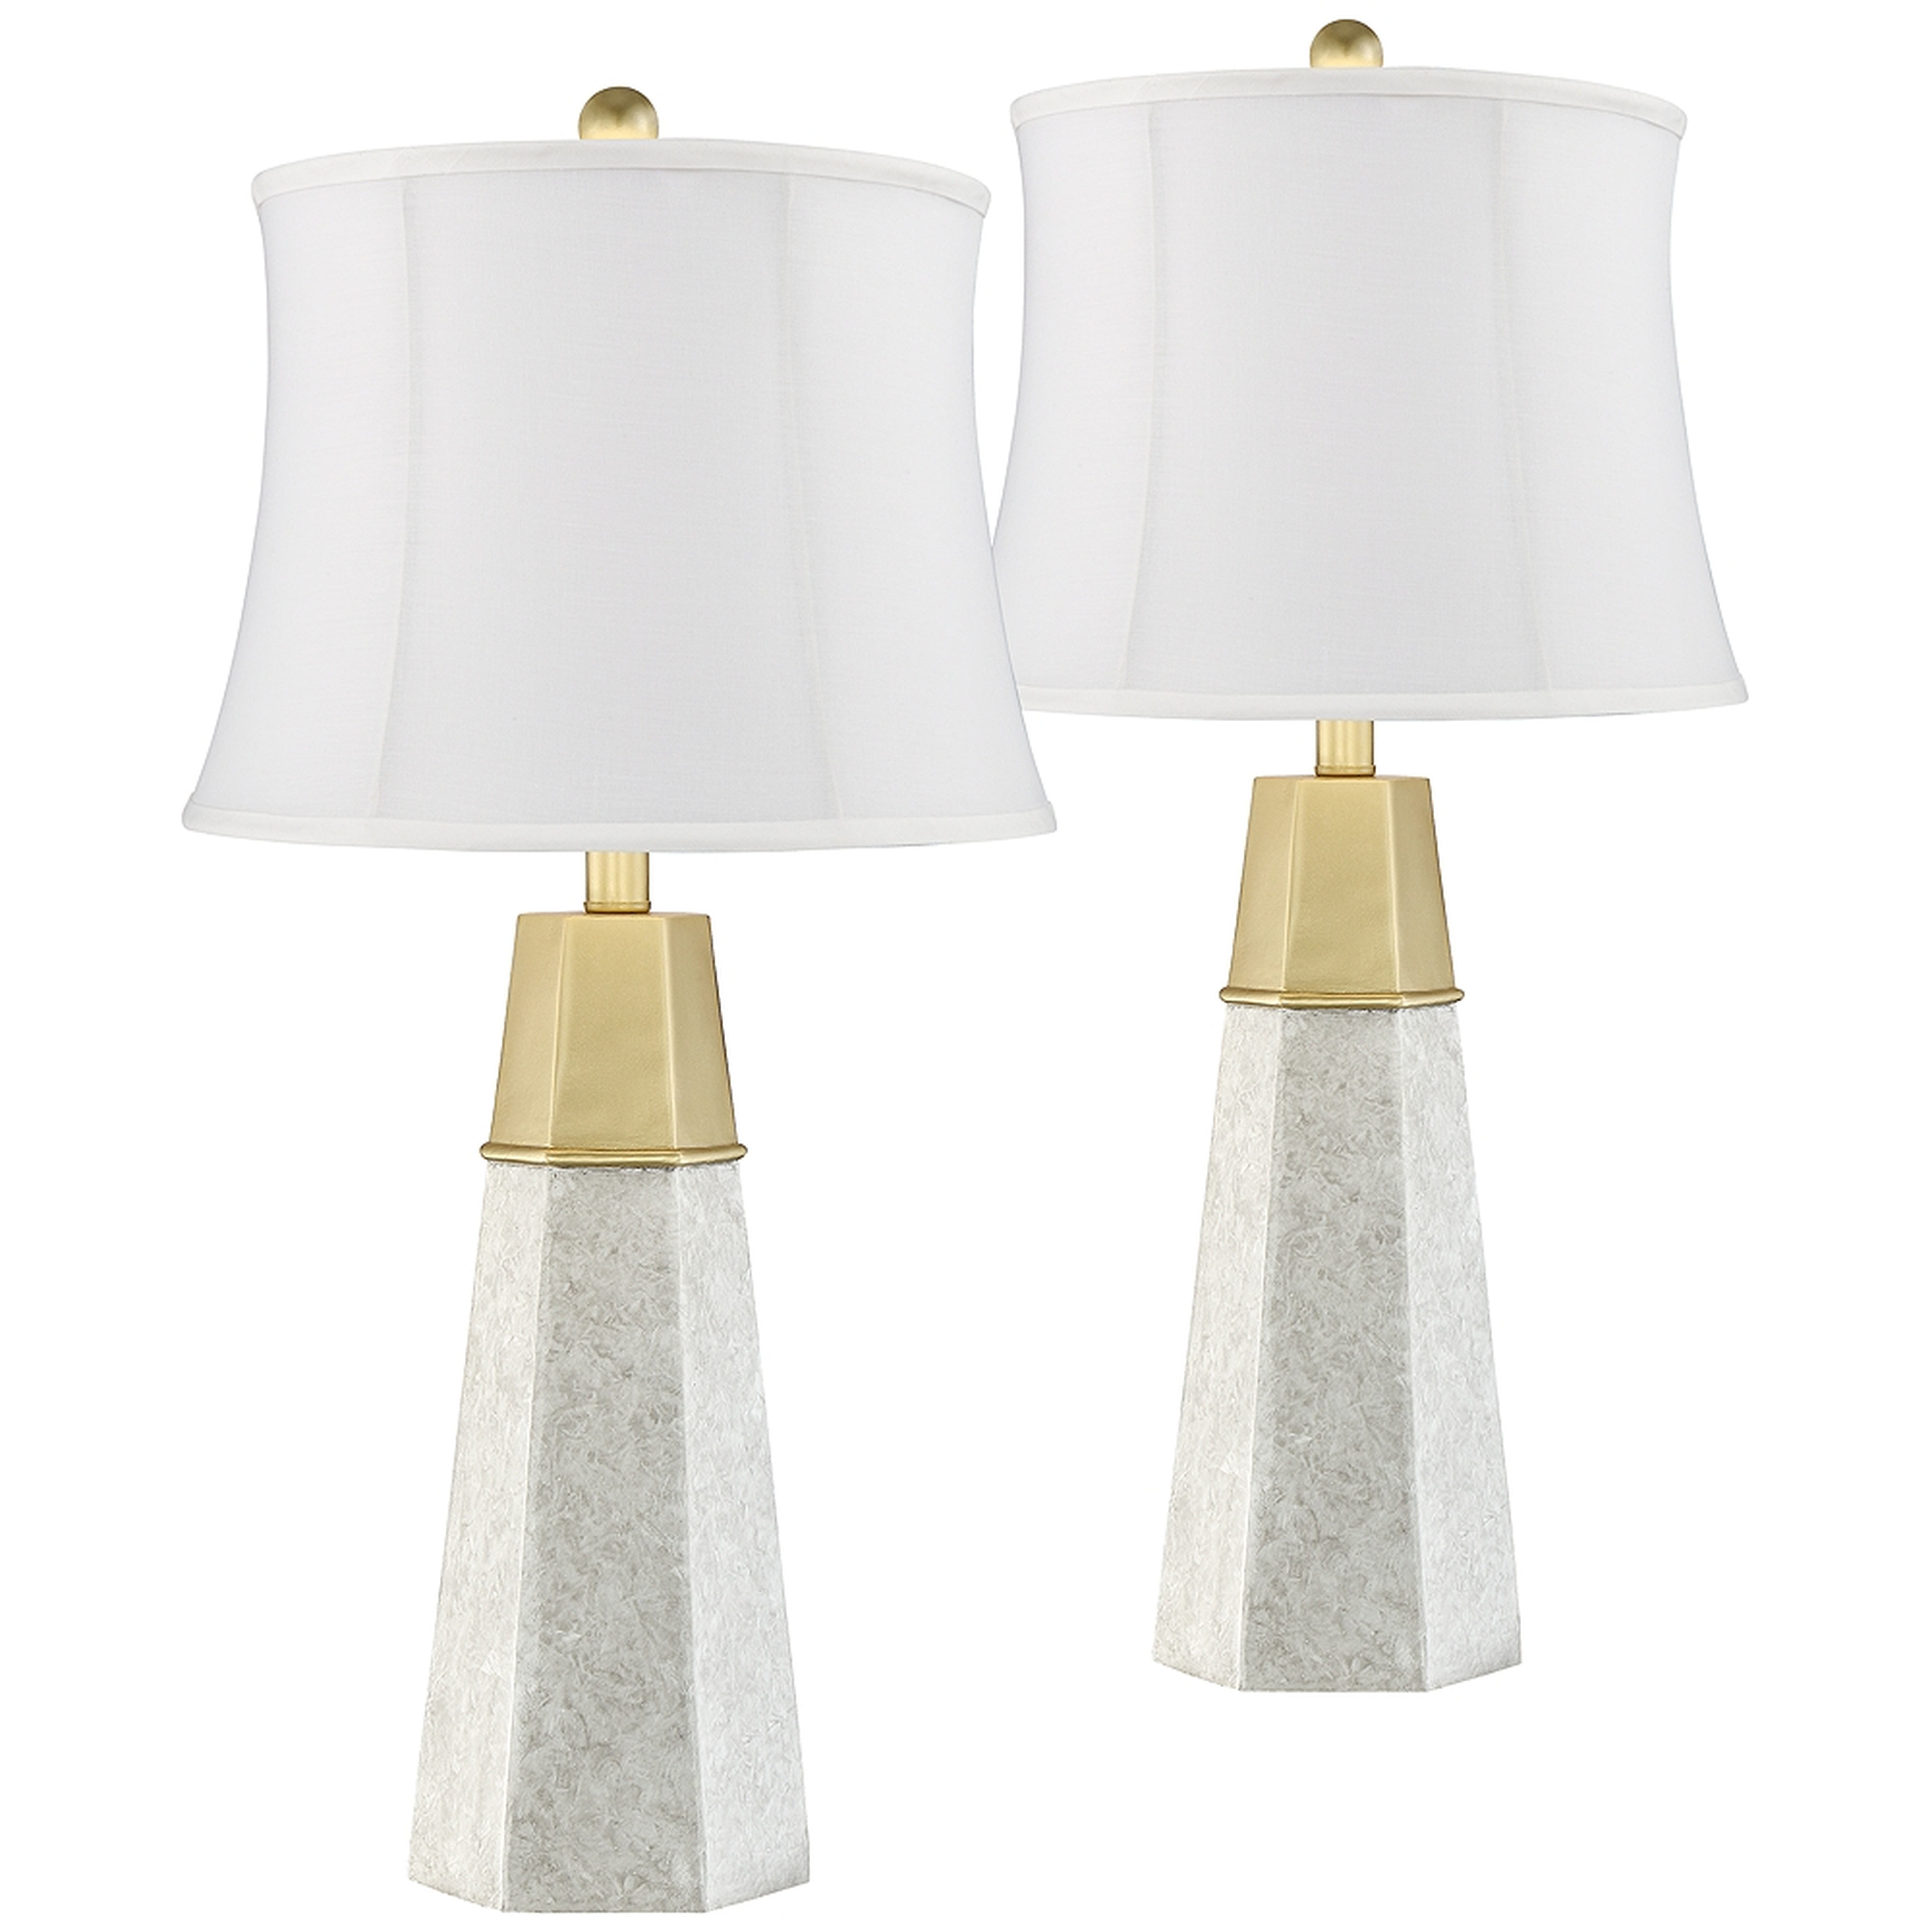 Julie Tapered Column Cream Shade Table Lamps Set of 2 - Style # 96P31 - Lamps Plus